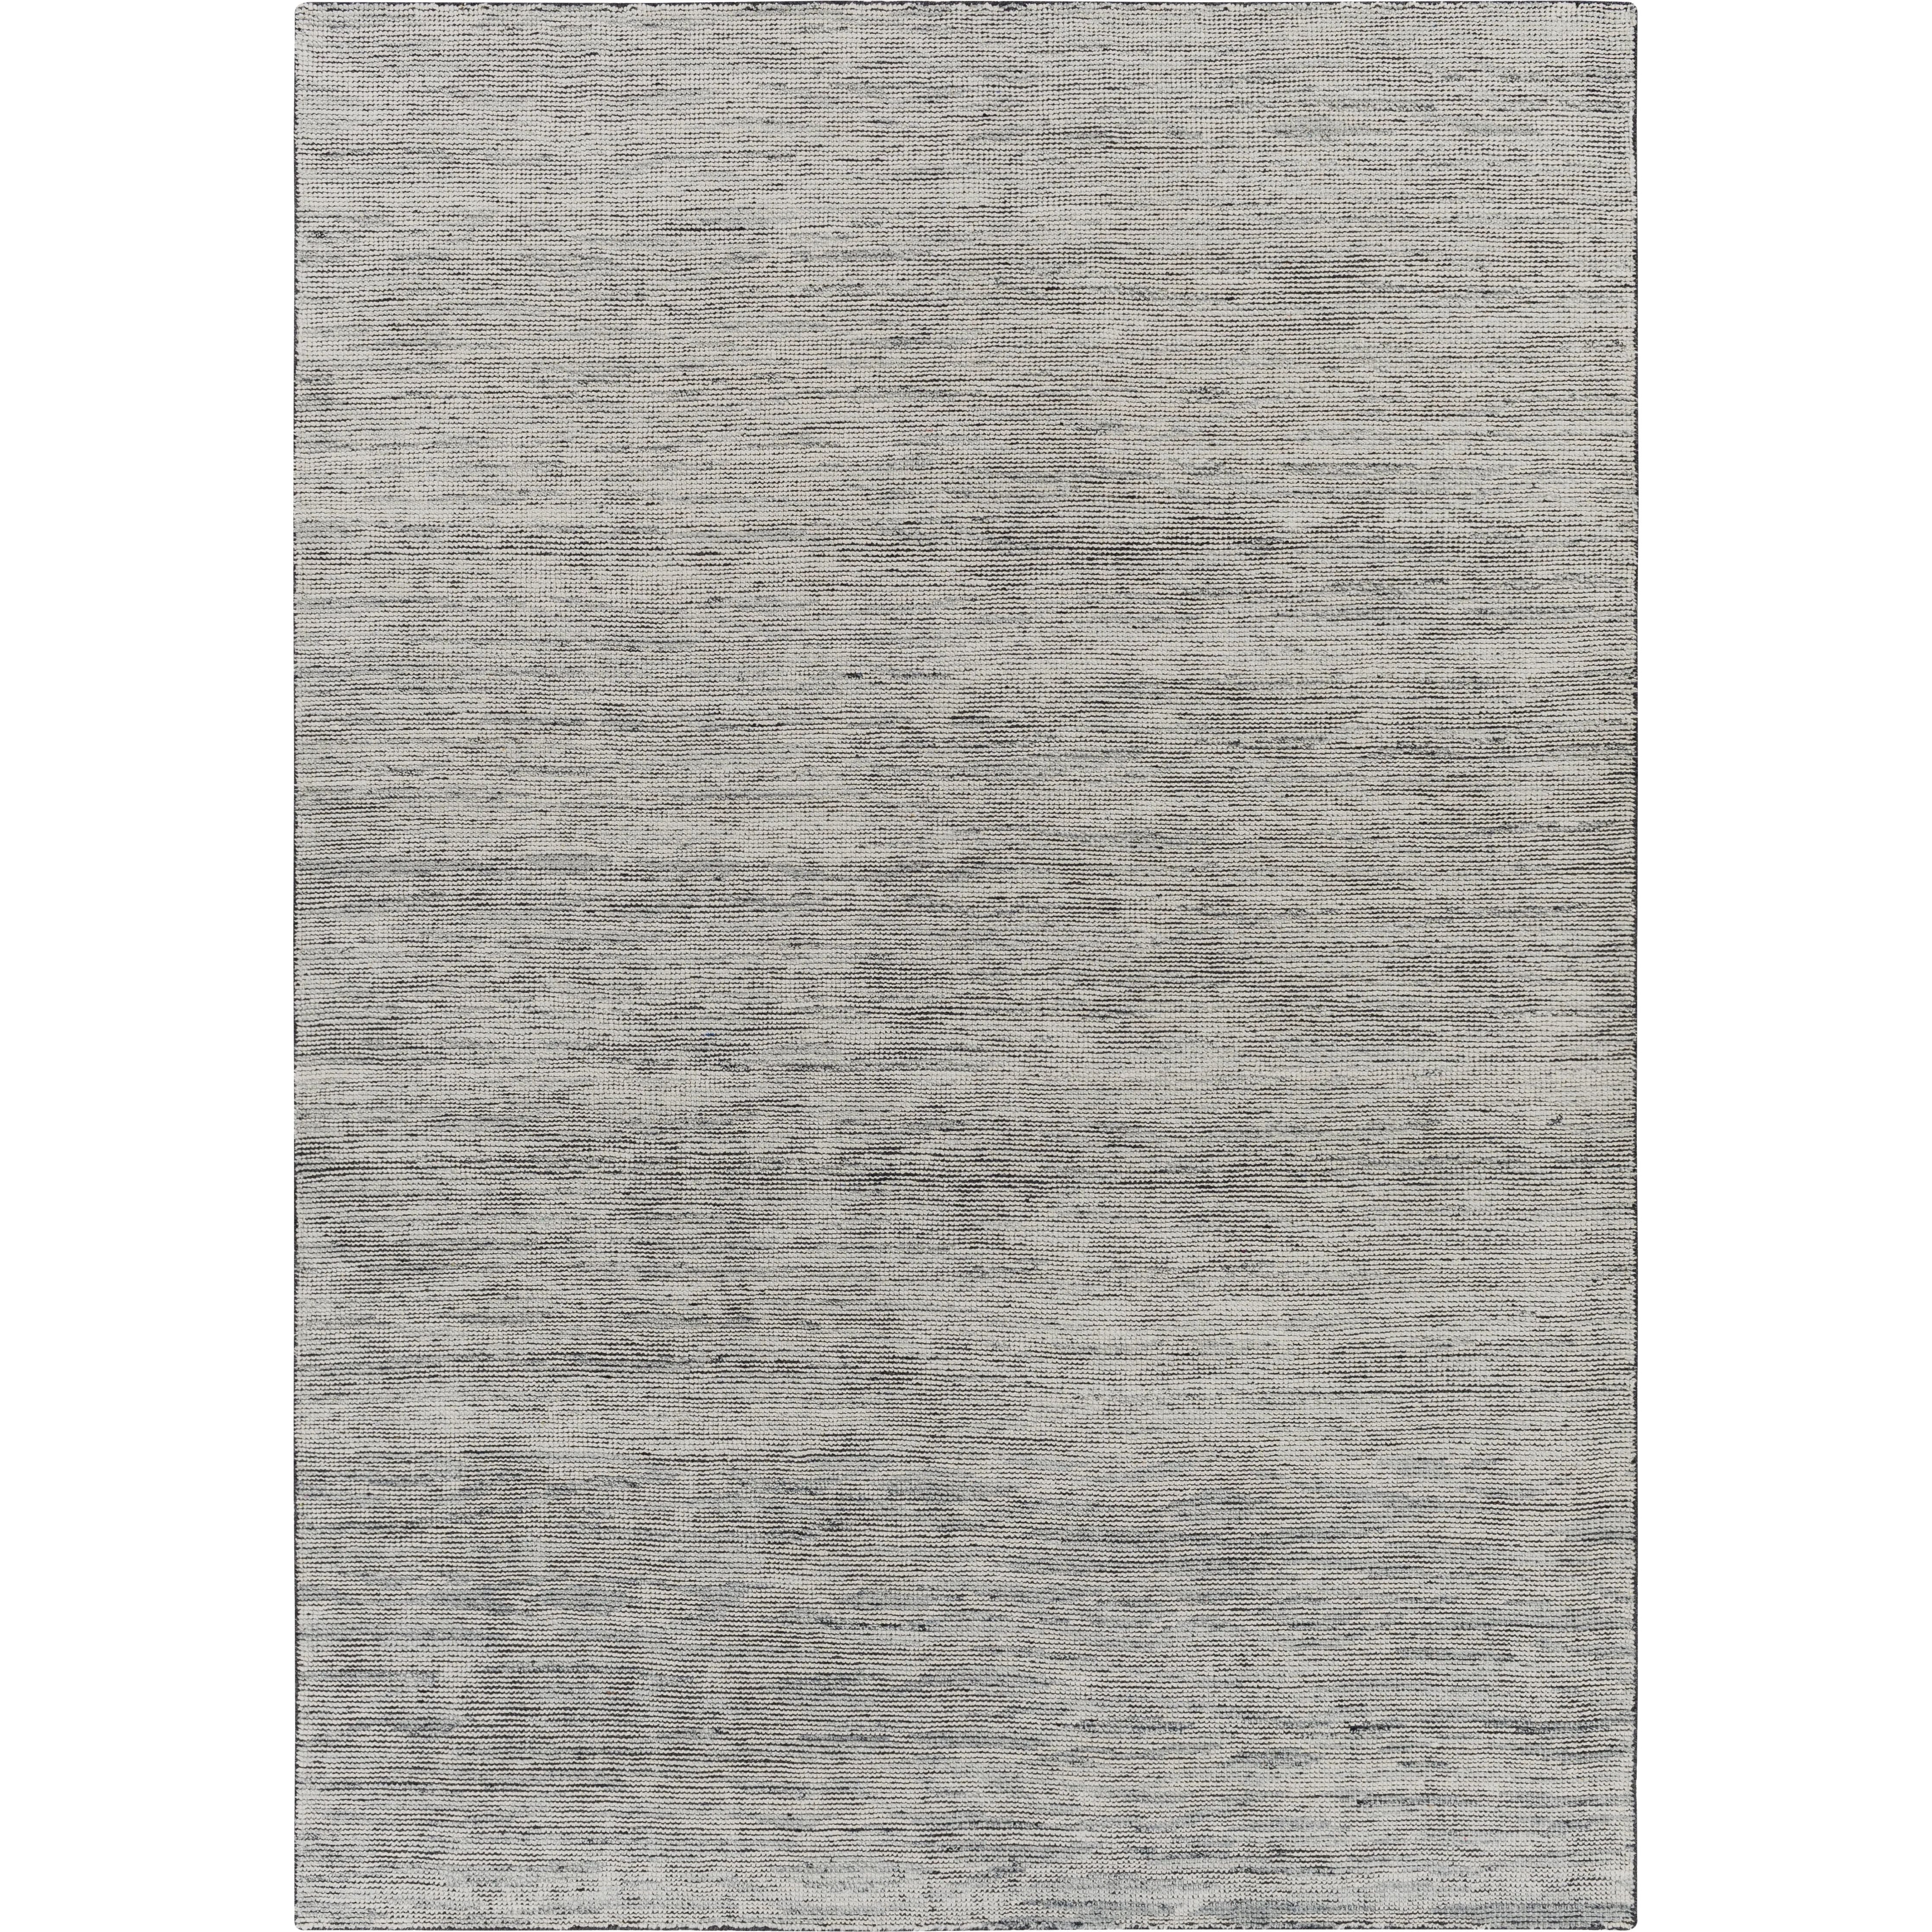 The simplistic yet compelling rugs from the Malaga Enzo effortlessly serve as the exemplar representation of modern decor. Amethyst Home provides interior design, new home construction design consulting, vintage area rugs, and lighting in the Salt Lake City metro area.